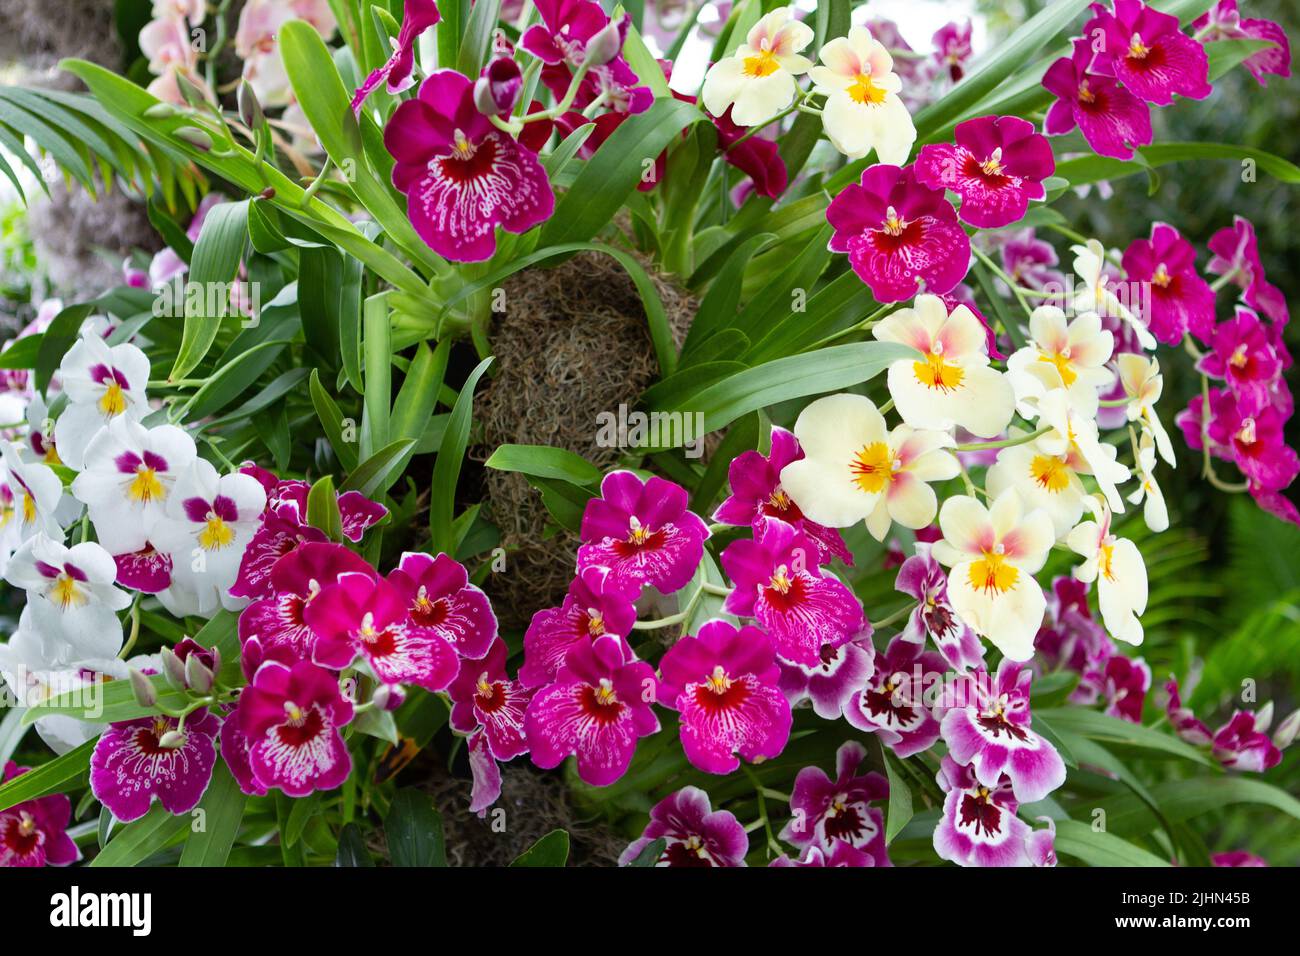 Miltoniopsis orchids in bloom Stock Photo